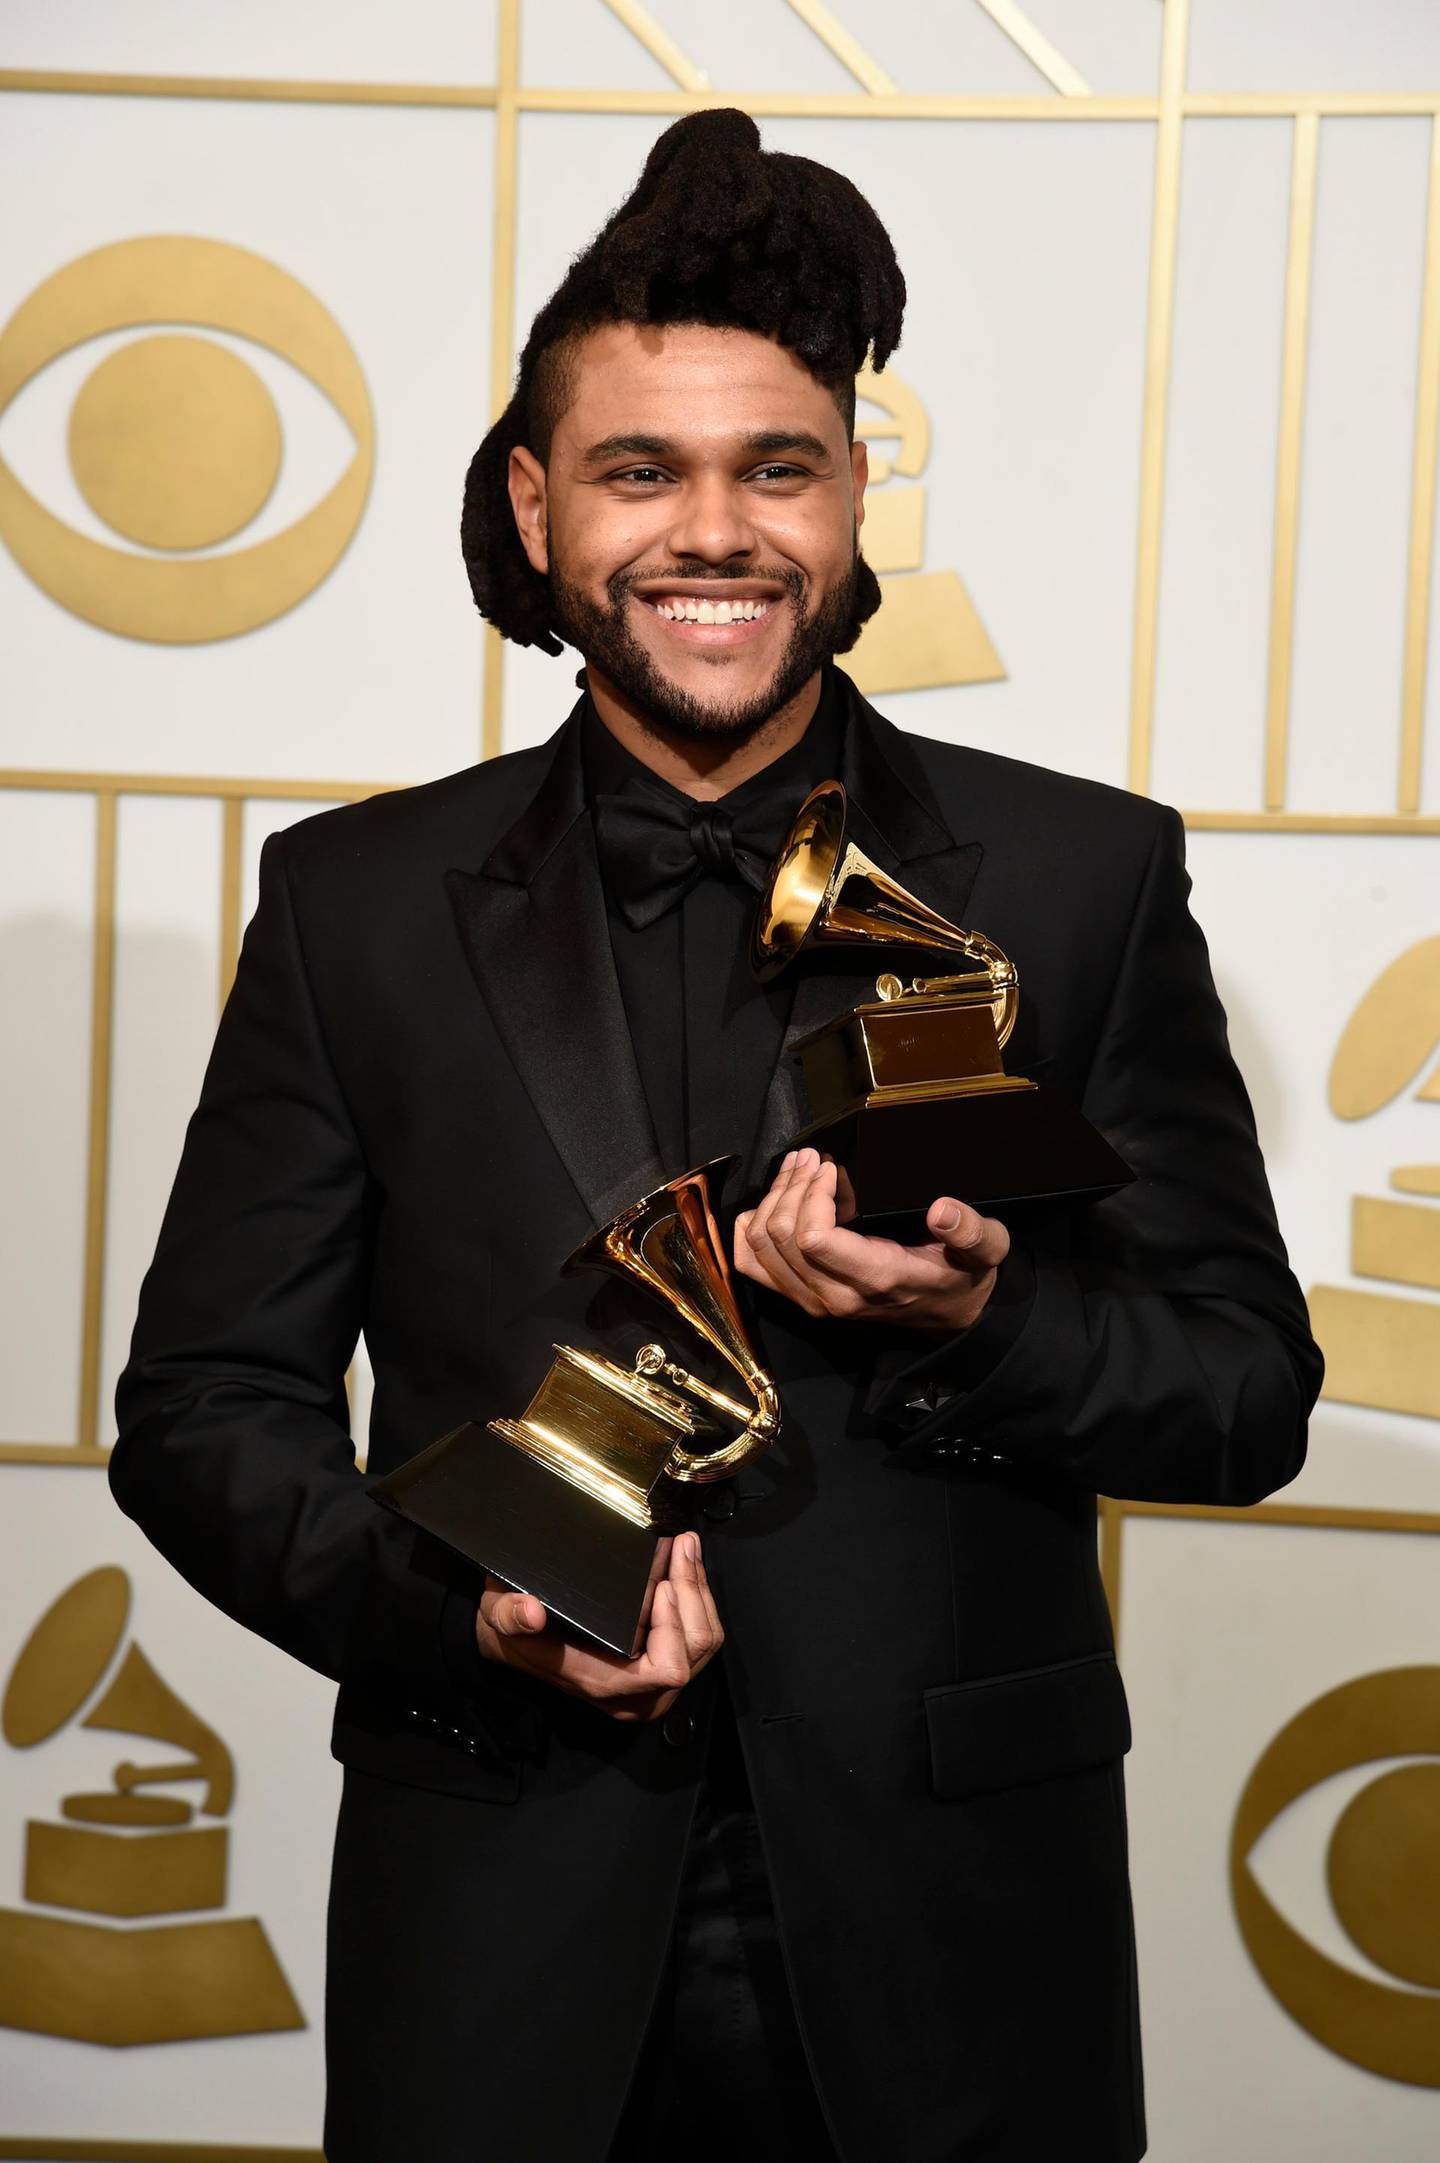 FILE - The Weeknd poses in the press room with the awards for best R&B performance for "Earned It (Fifty Shades of Grey)" and best urban contemporary album for "Beauty Behind The Madness" at the 58th annual Grammy Awards in Los Angeles on Feb. 15, 2016. The Grammy Awards are in discussion to remove its nomination review committees â€” the group that determines the contenders for key awards at the coveted music show. (Photo by Chris Pizzello/Invision/AP, File)